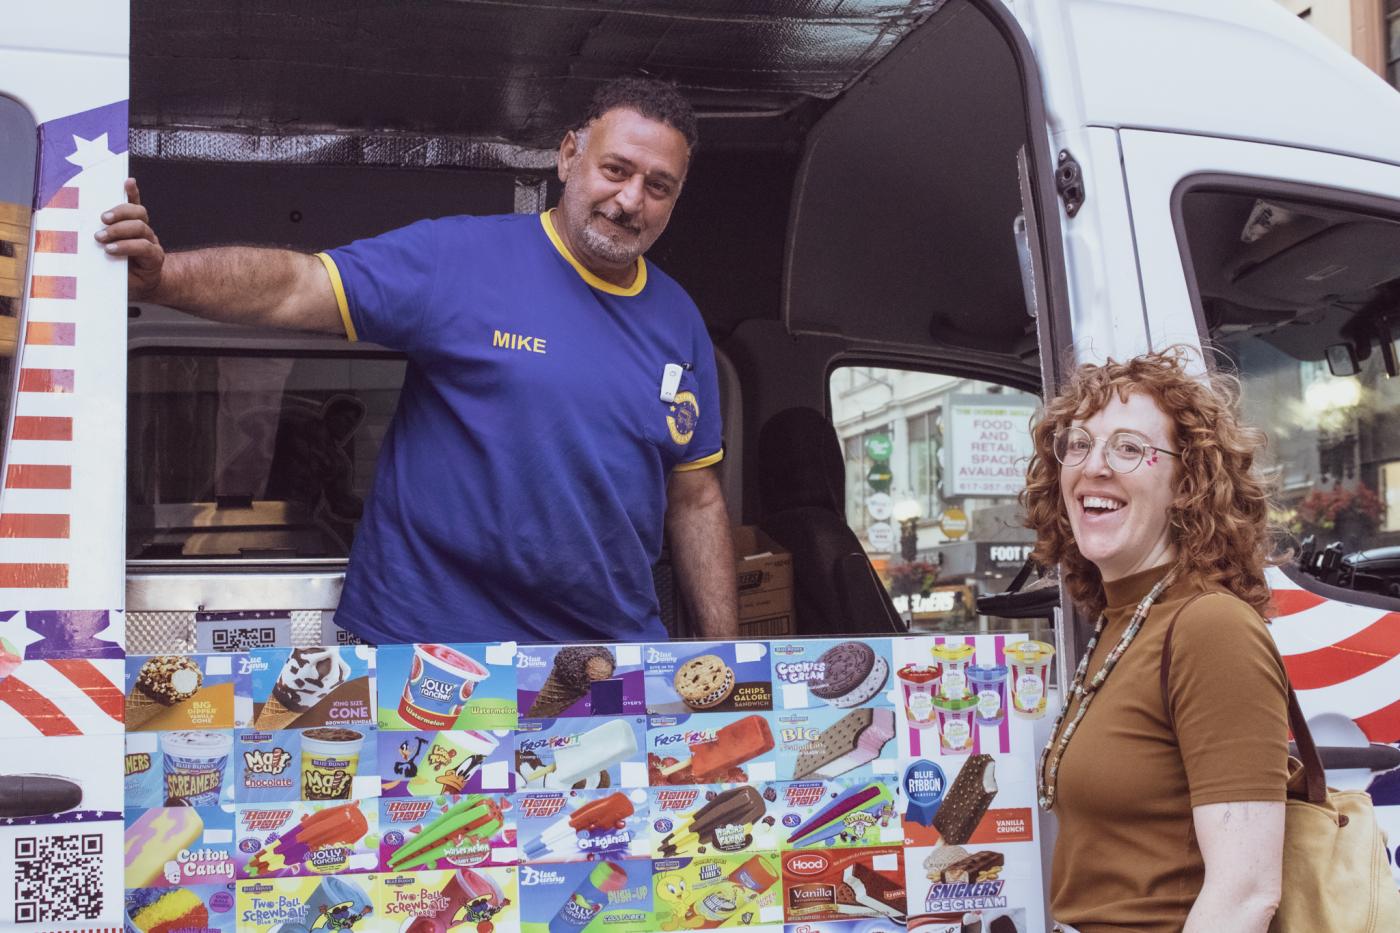 A man of color (his shirt says his name is Mike) in an ice cream truck poses with a white lady with red hair, who stands outside the truck.